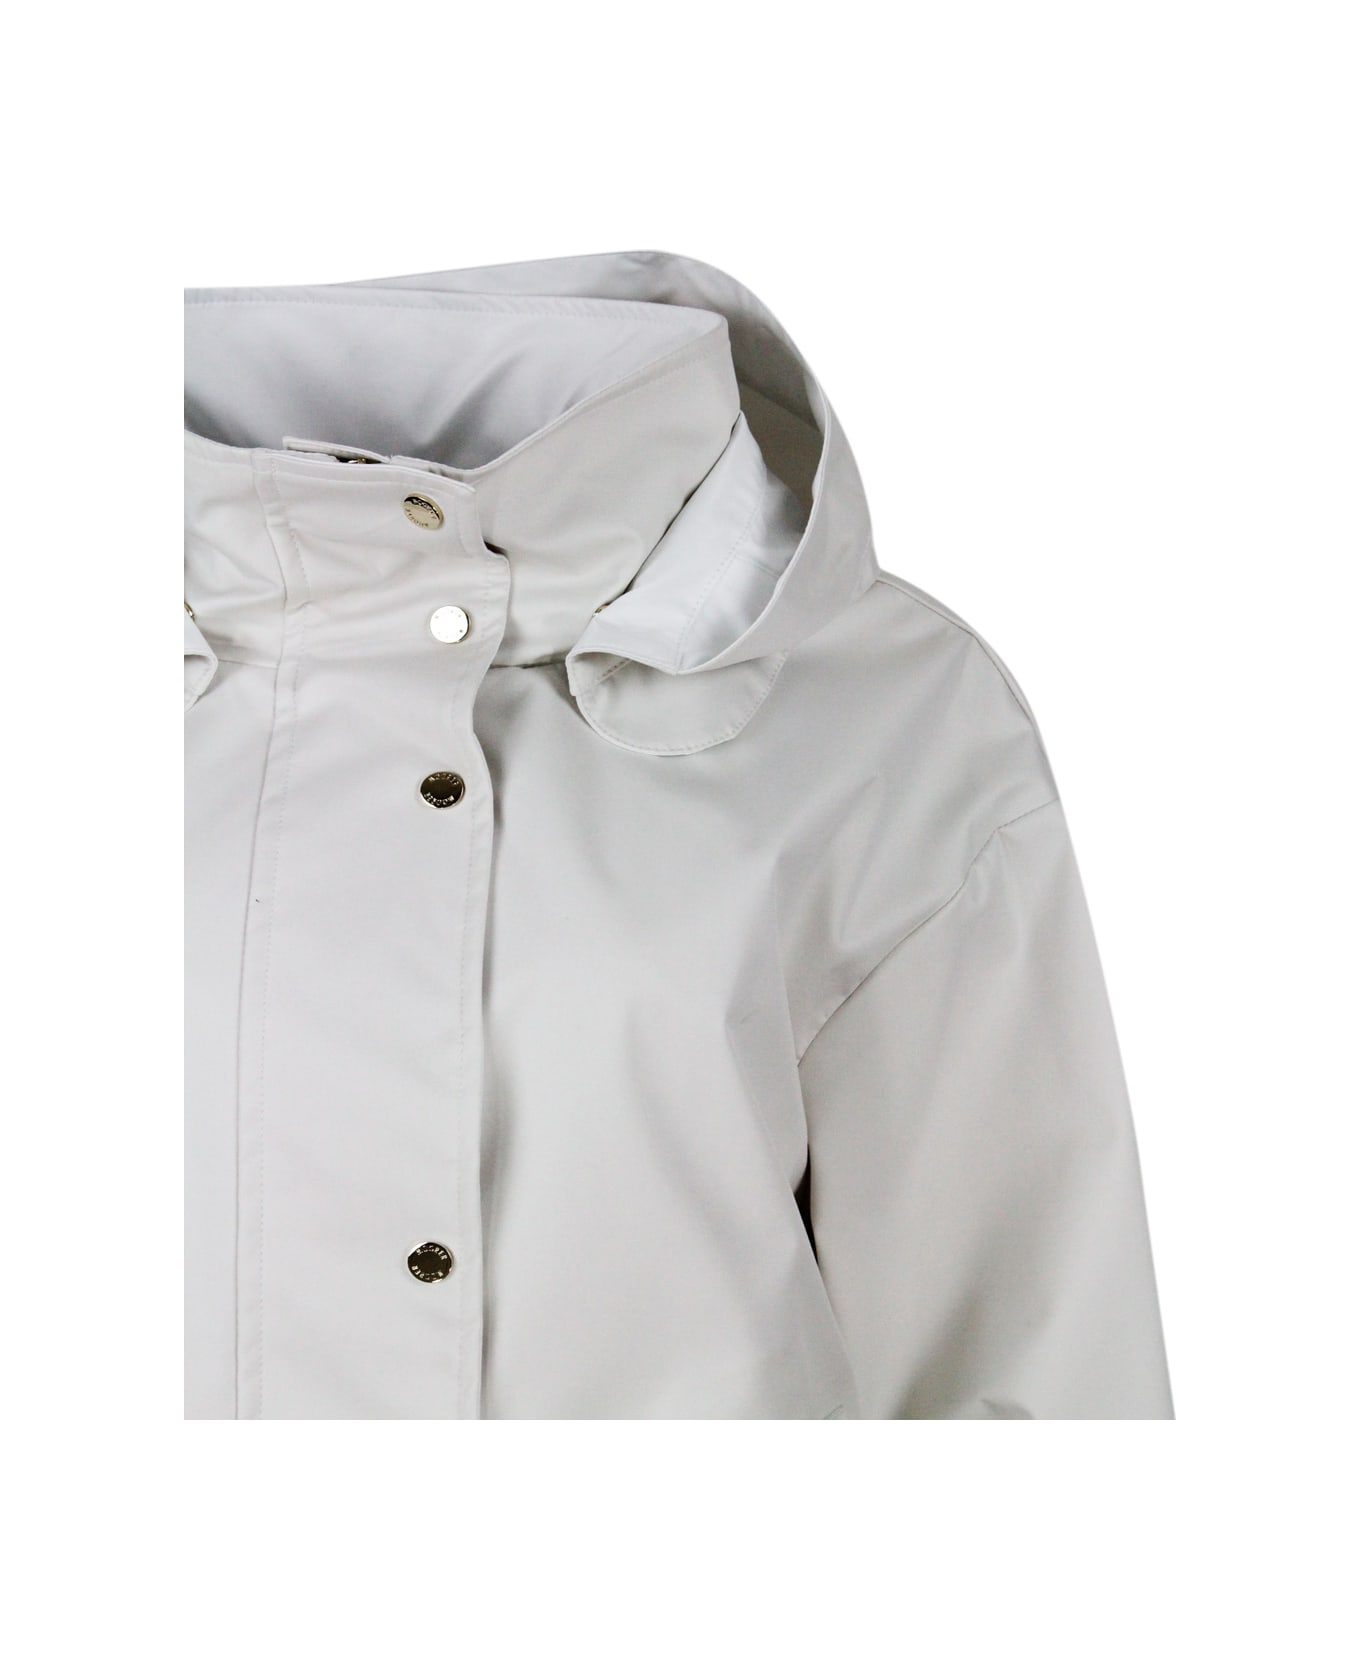 Moorer Jacket In Fine Waterproof Material 2 Umbrellas With Detachable Hood, Side Zips On The Sides And Internal Drawstring. Zip And Snap Button Closure - Avorio light bianco ジャケット